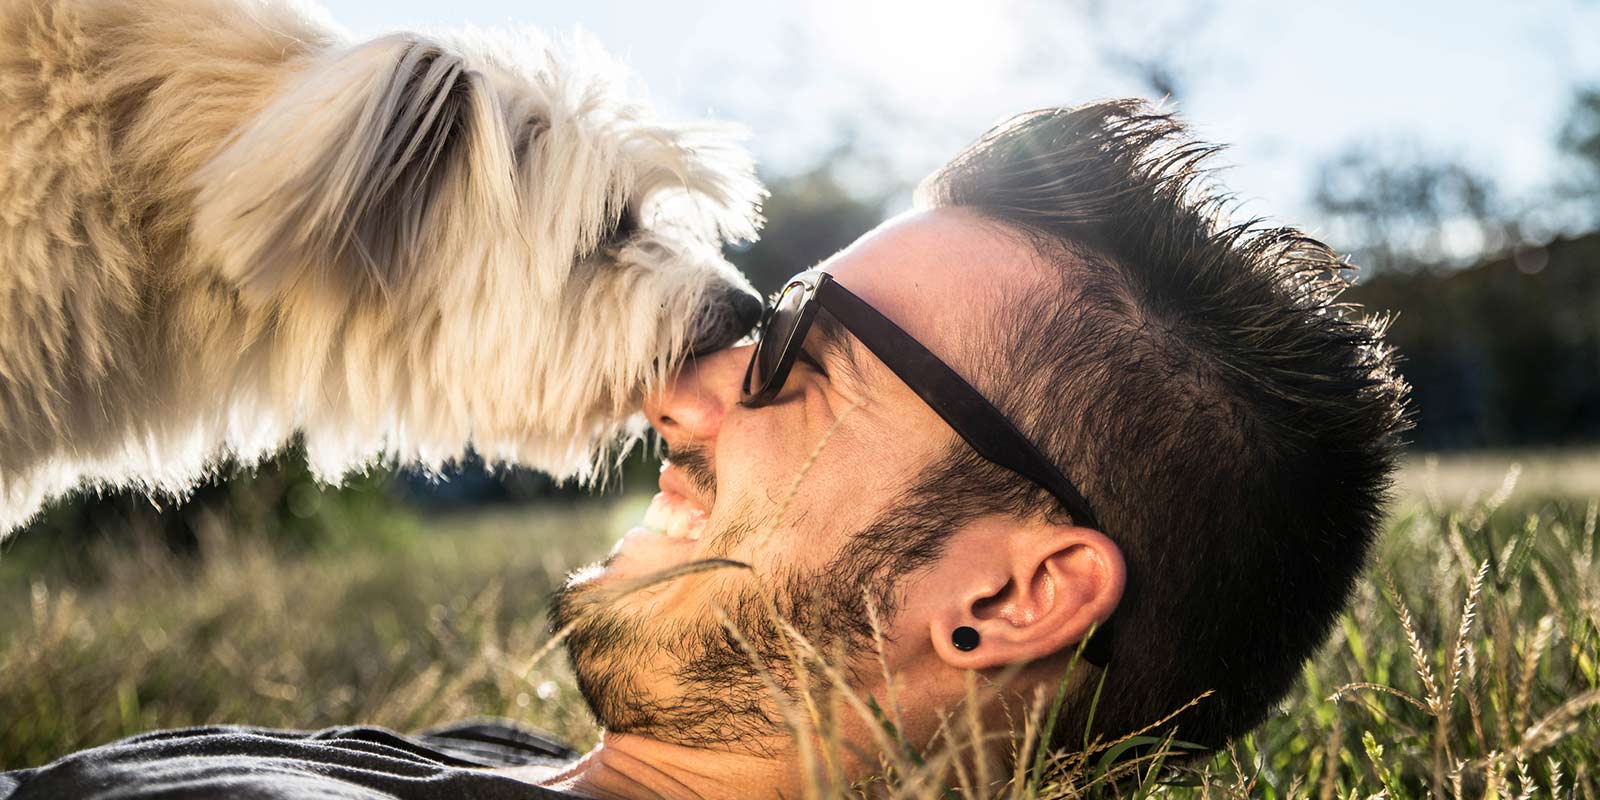 A man gets licked in the face by his dog as he is laying in the grass on a sunny day.